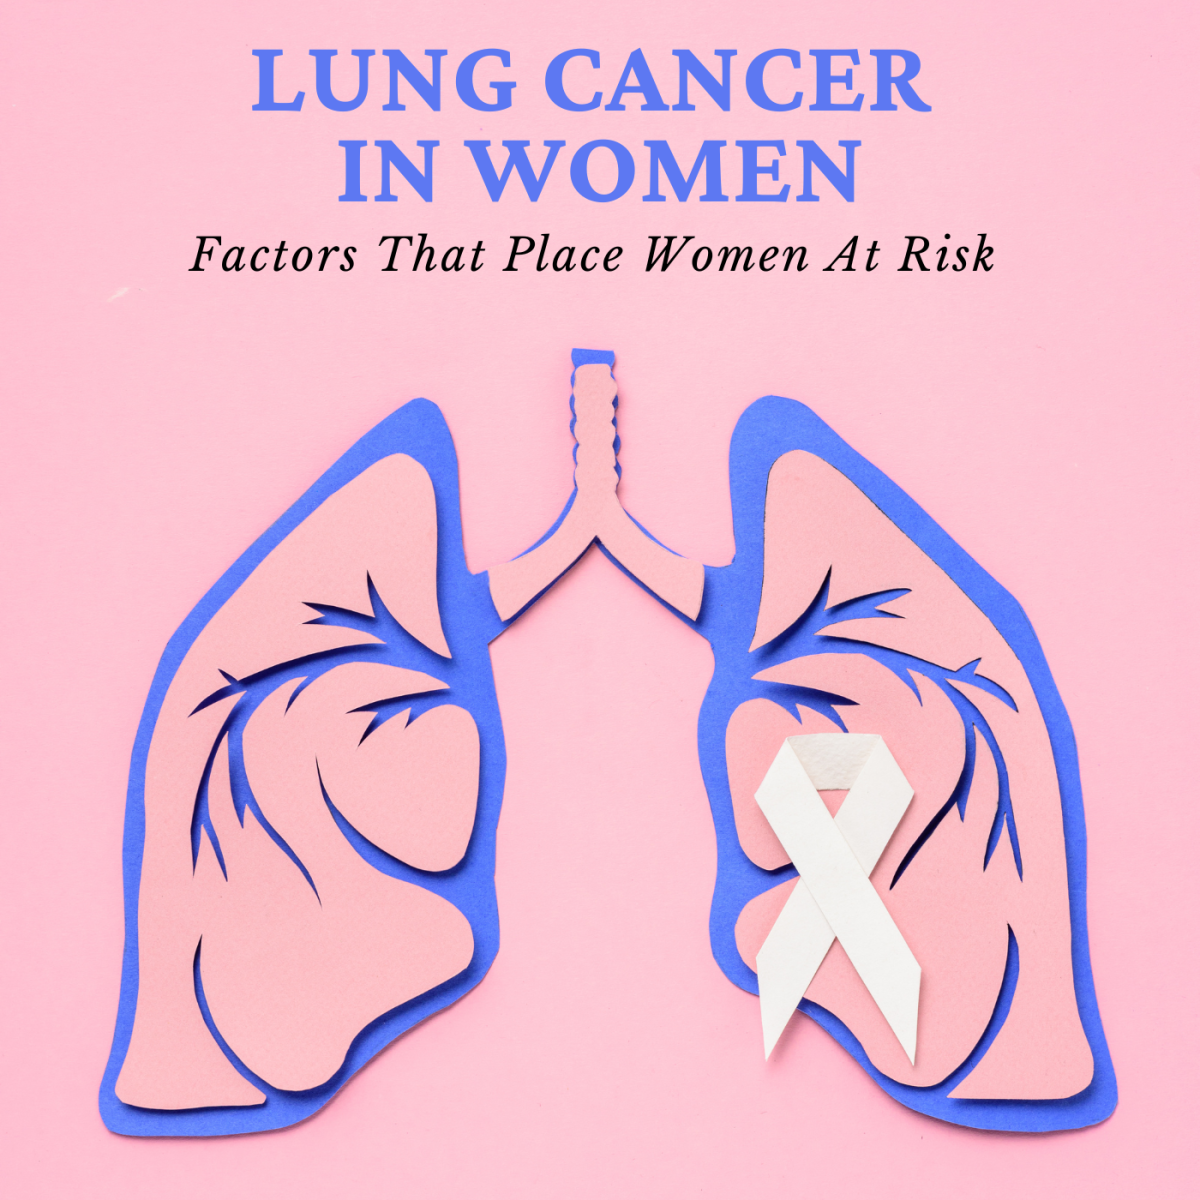 Lung Cancer: An Increasing Risk for Women